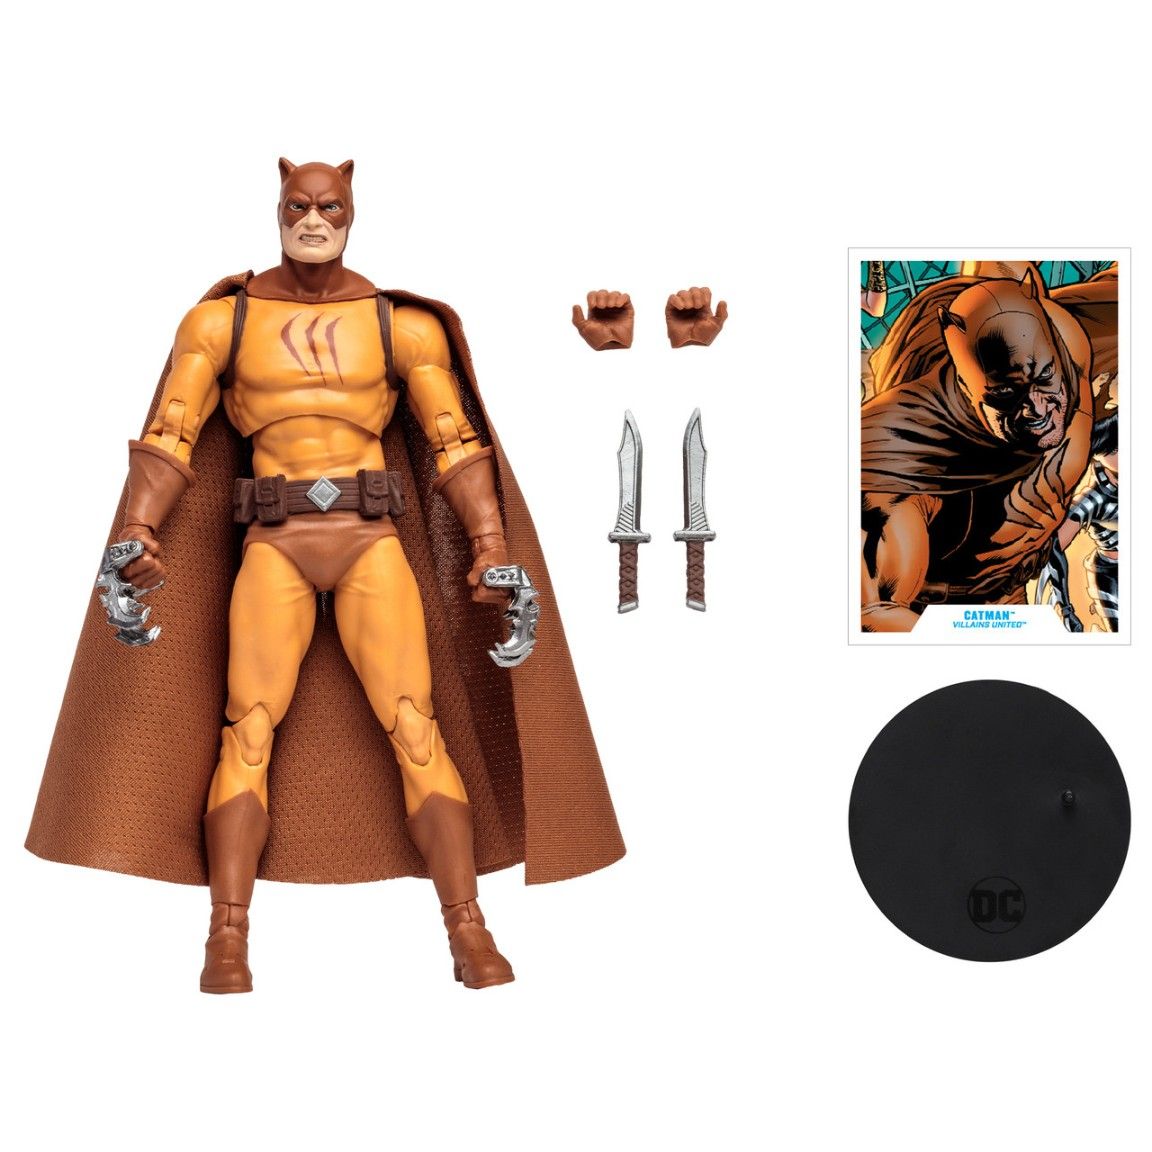 DC Multiverse Catman Action Figure Launches From McFarlane Toys